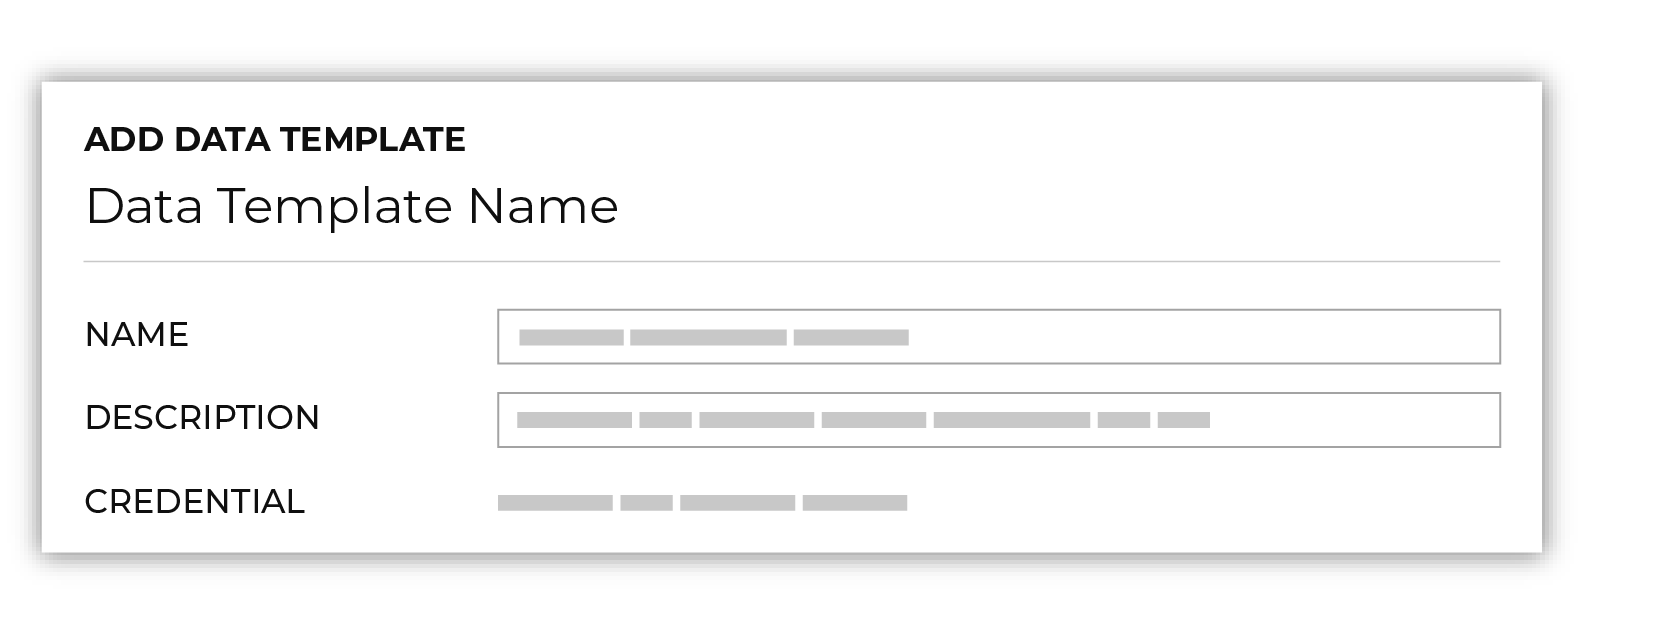 Name and description of data template.